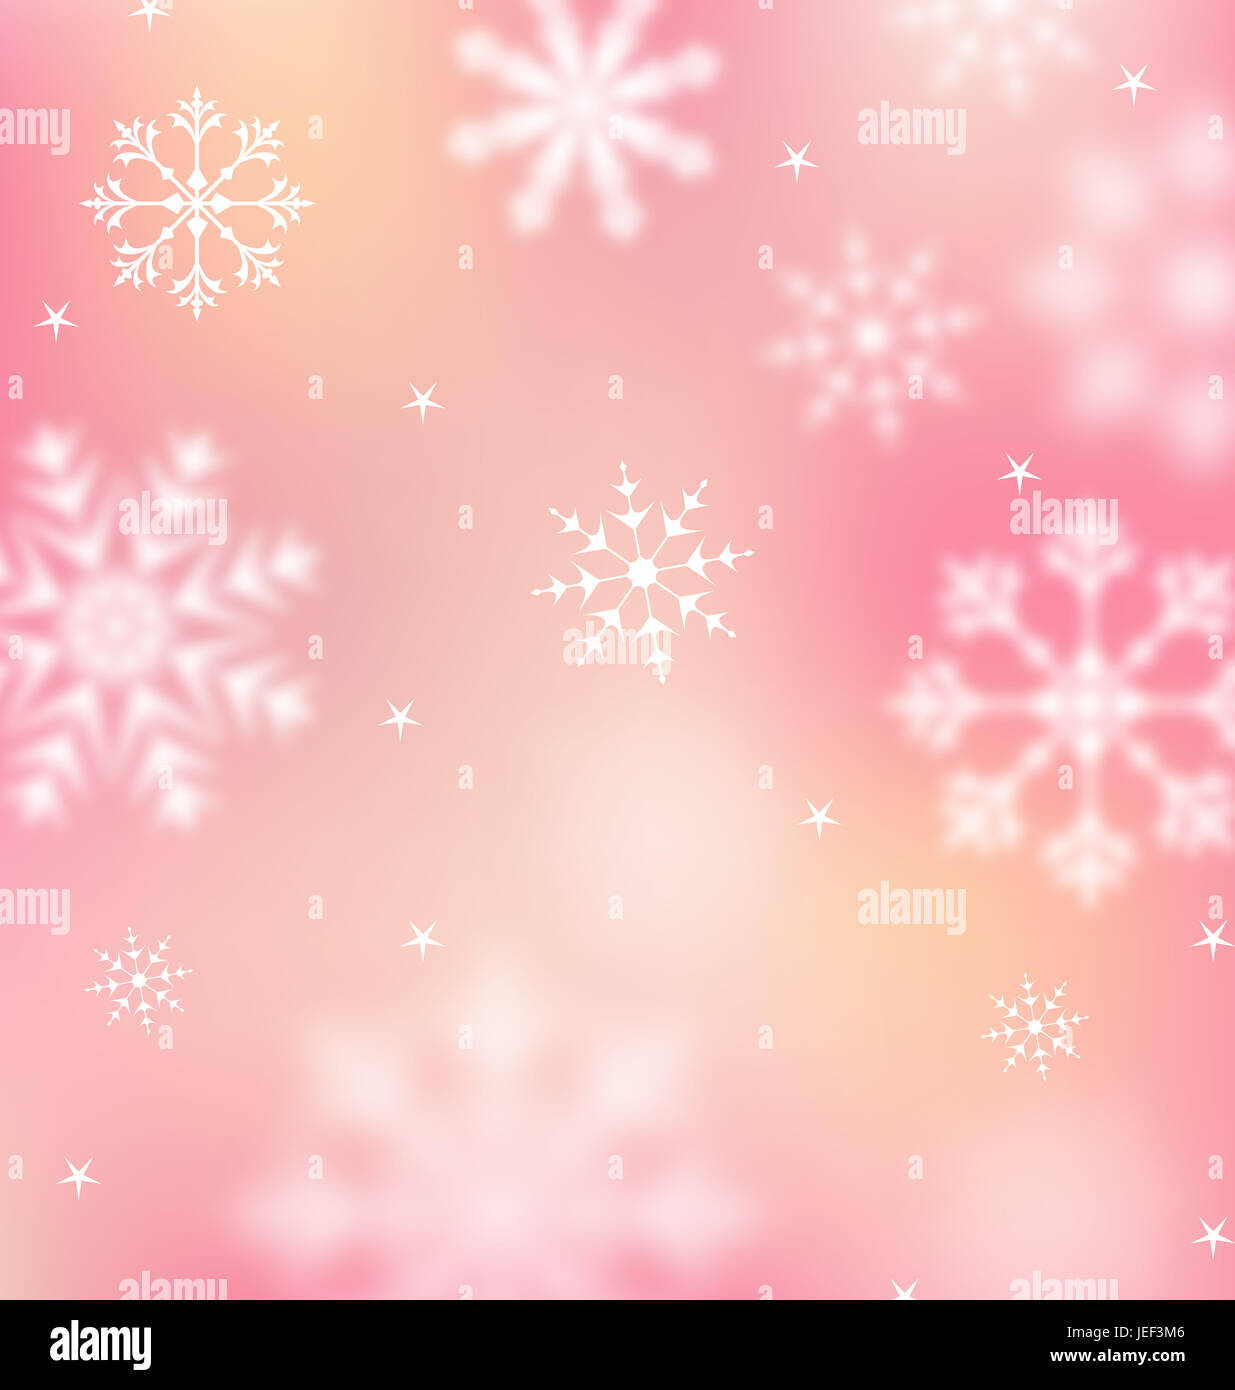 Illustration New Year pink wallpaper with snowflakes Stock Photo - Alamy